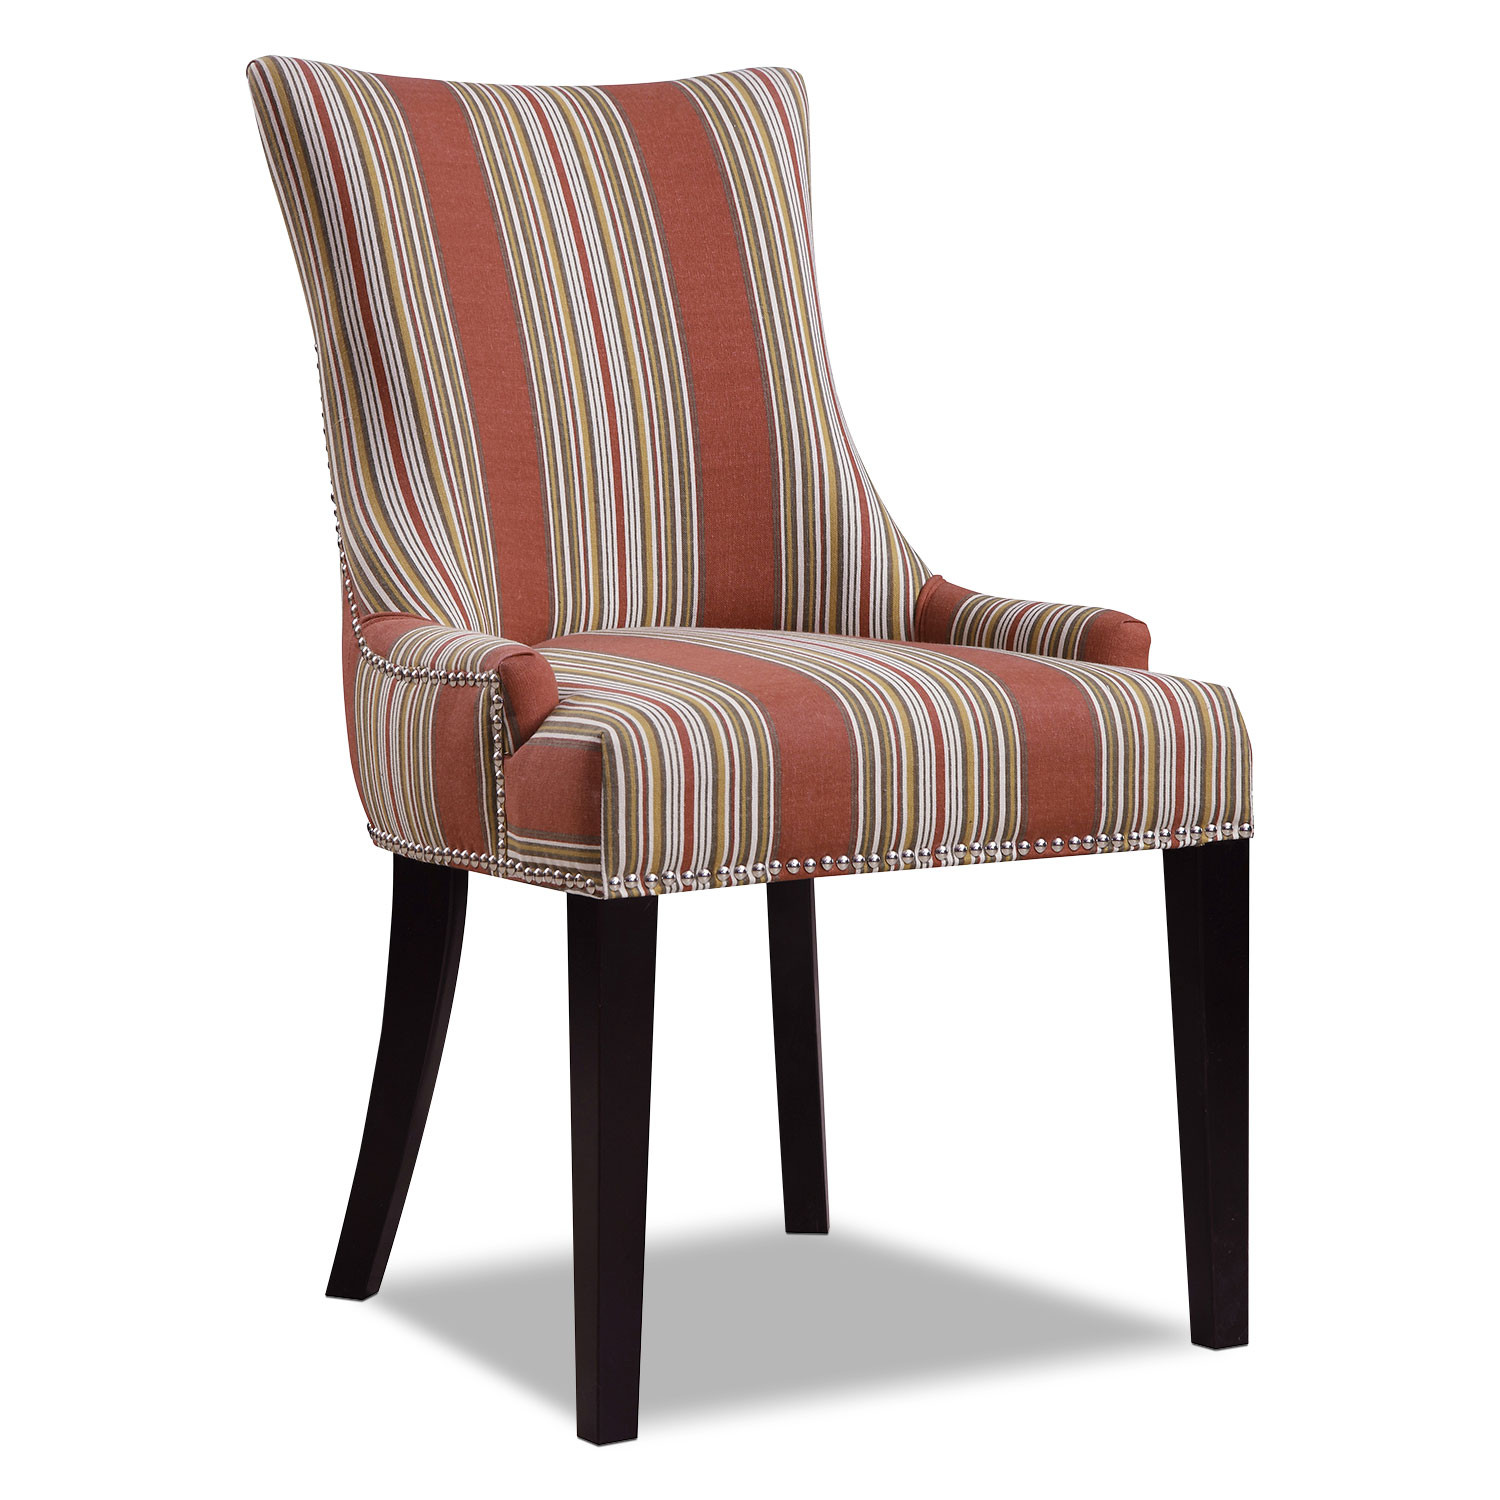 Accent Chairs For Living Room
 Paige Accent Chair Striped